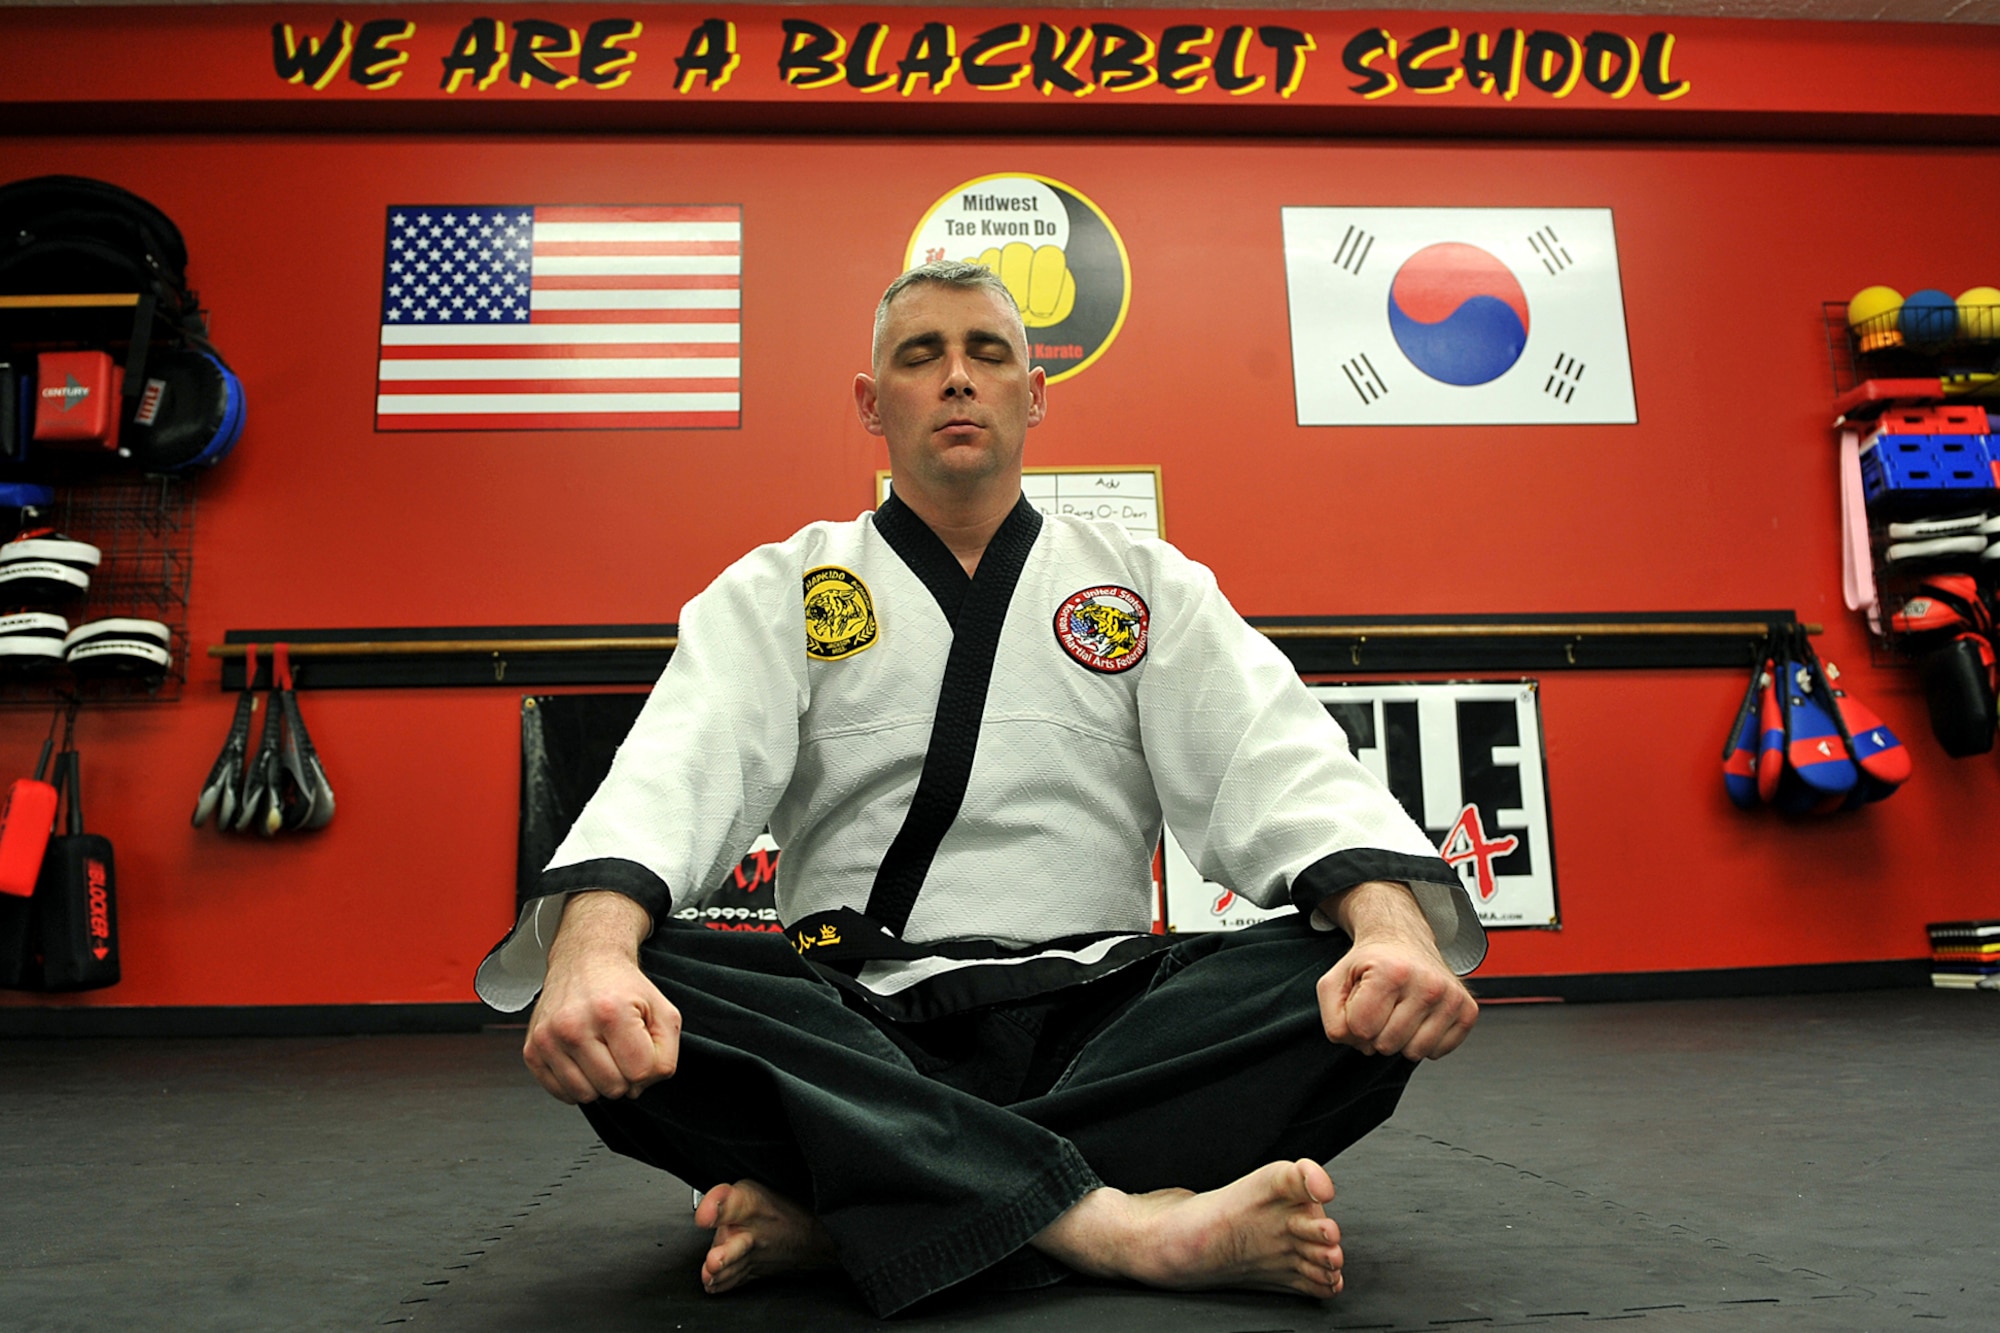 OFFUTT AIR FORCE BASE, Neb. - Technical Sgt. Michael Munyon, with the 55th Security Forces Squadron, meditates before teaching a hapkido class at an Omaha dojang March 12. Sergeant Munyon currently holds a 5th degree black belt in Taekwondo and a 2nd degree black belt in Hapkido, another form of Korean martial arts. He was recently inducted into the Masters Hall of Fame.

U.S. Air Force photo by Charles Haymond
